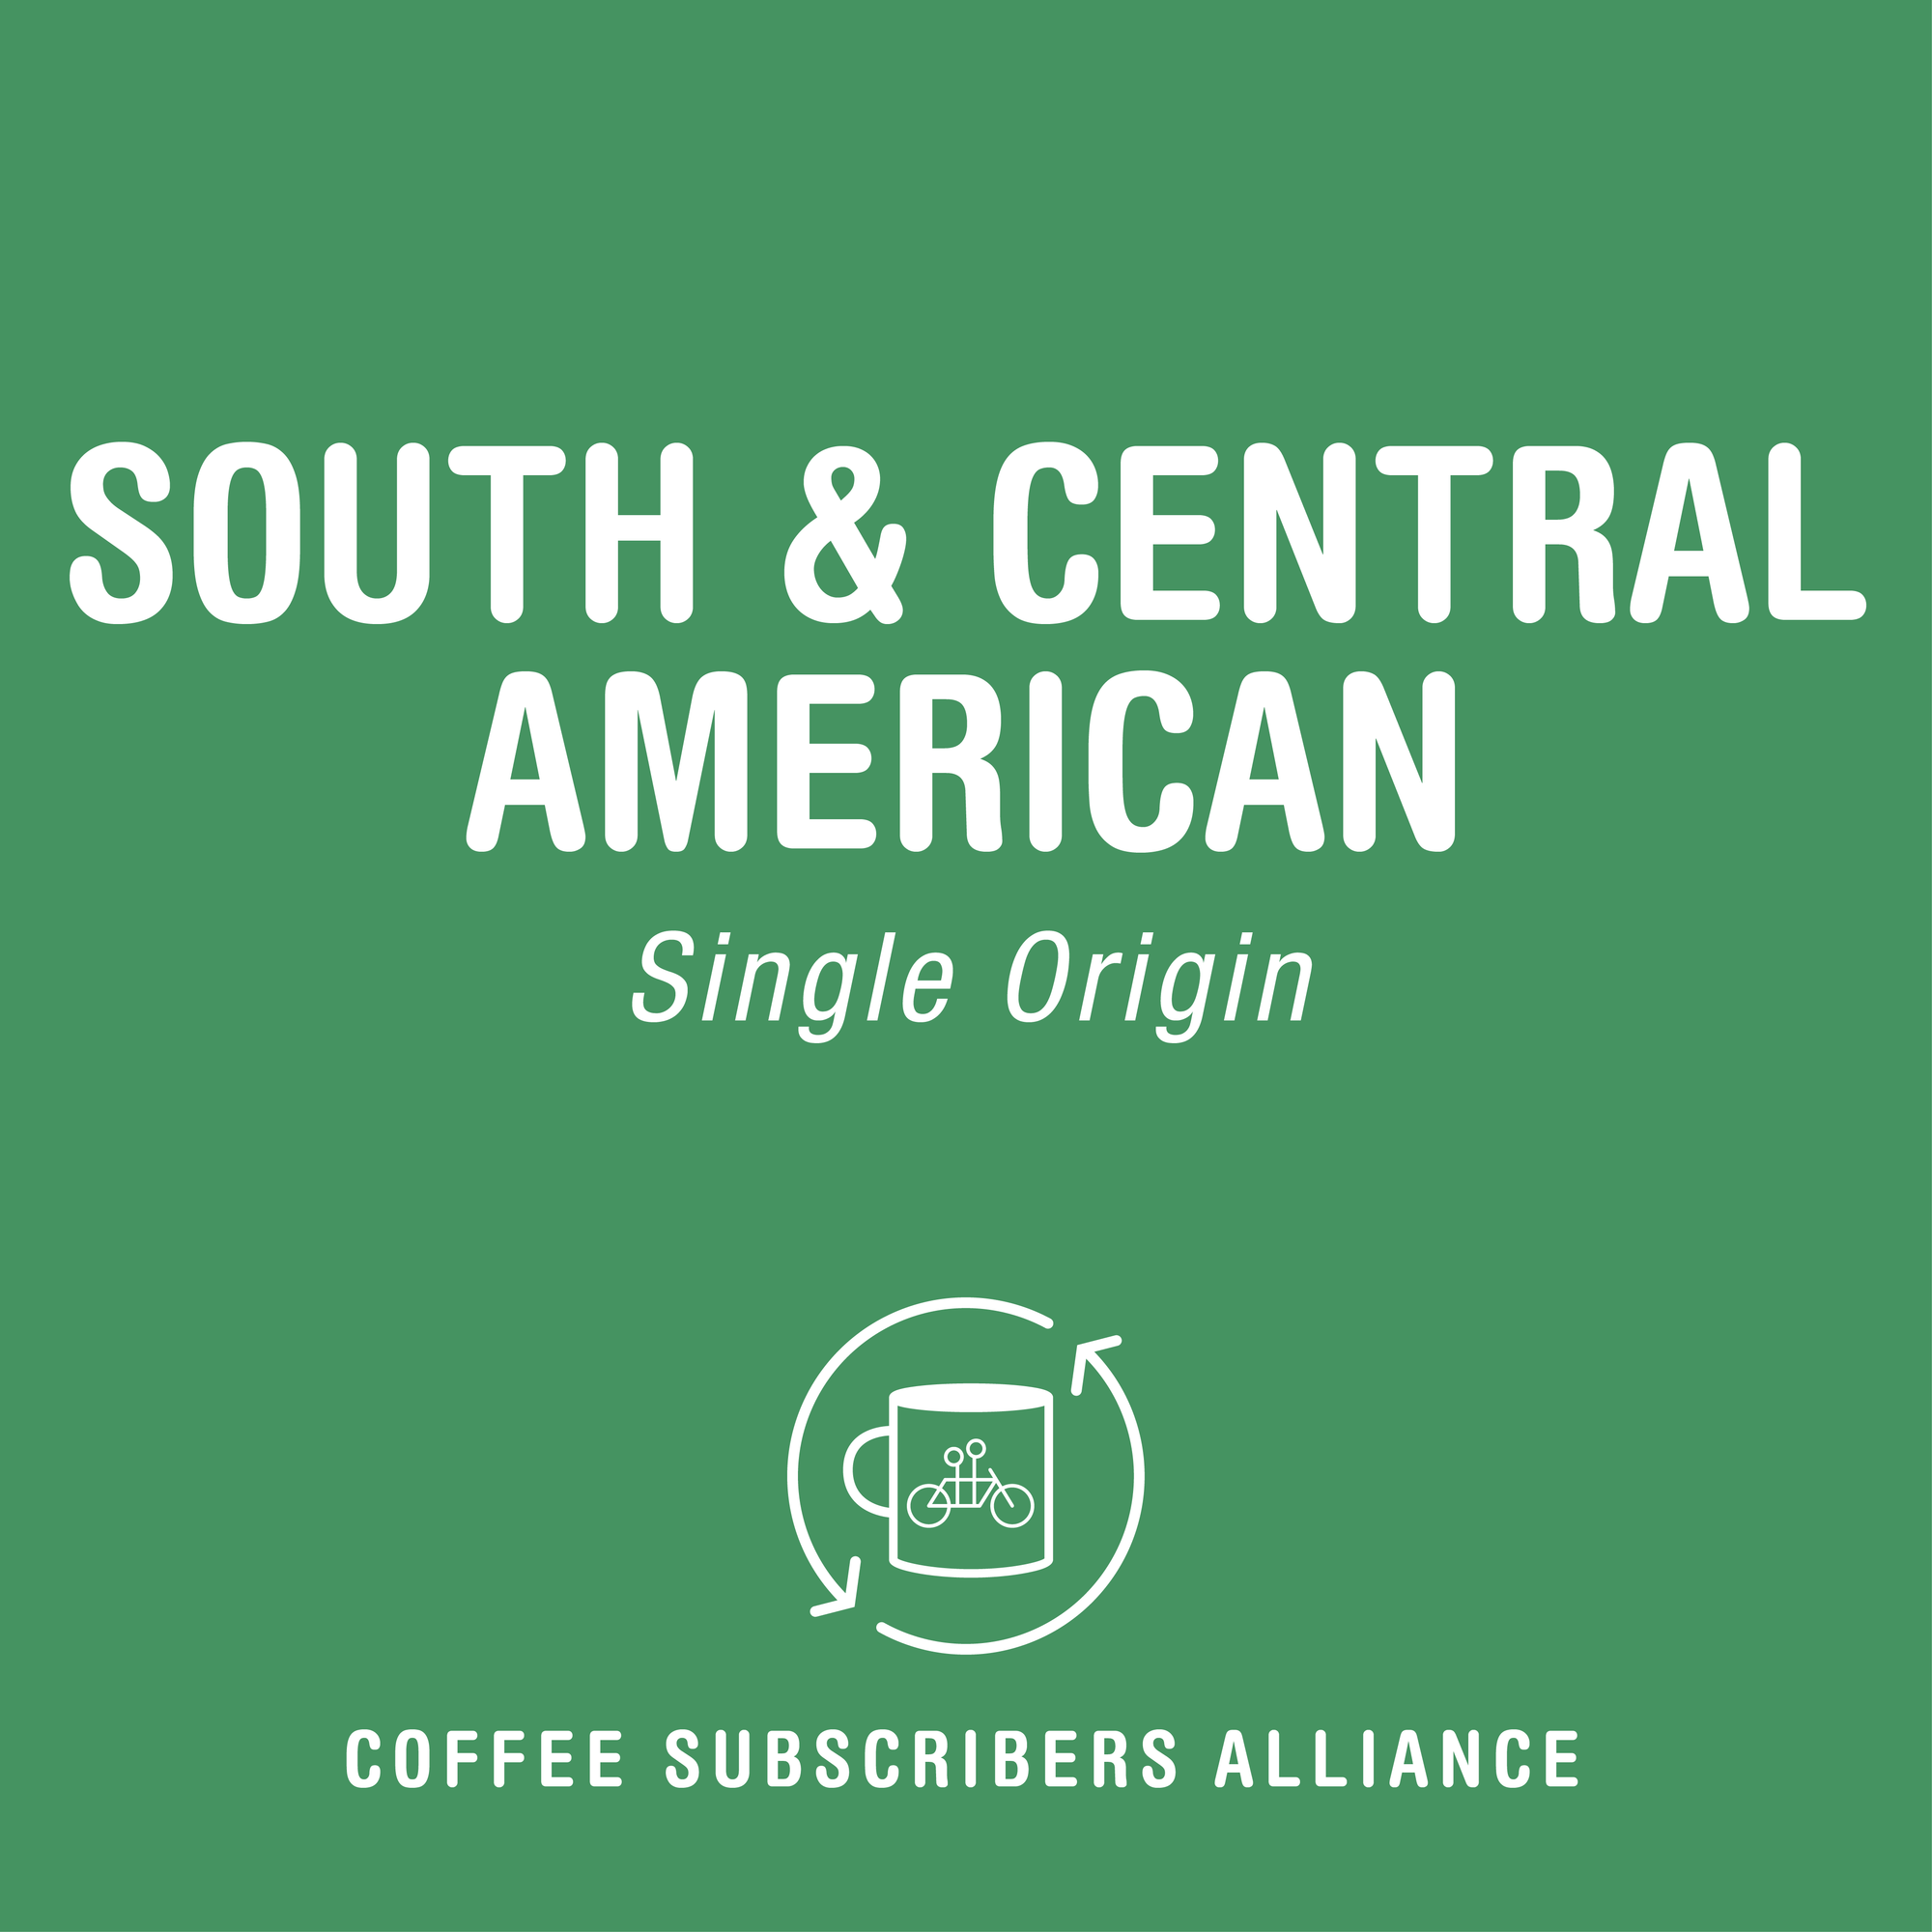 Logo of the South & Central American Subscription Gift - 1 Week x 6 by Tandem Coffee Roasters featuring text "south & central american single origin" on a green background, with a bicycle and coffee cup icon enclosed in a circle.